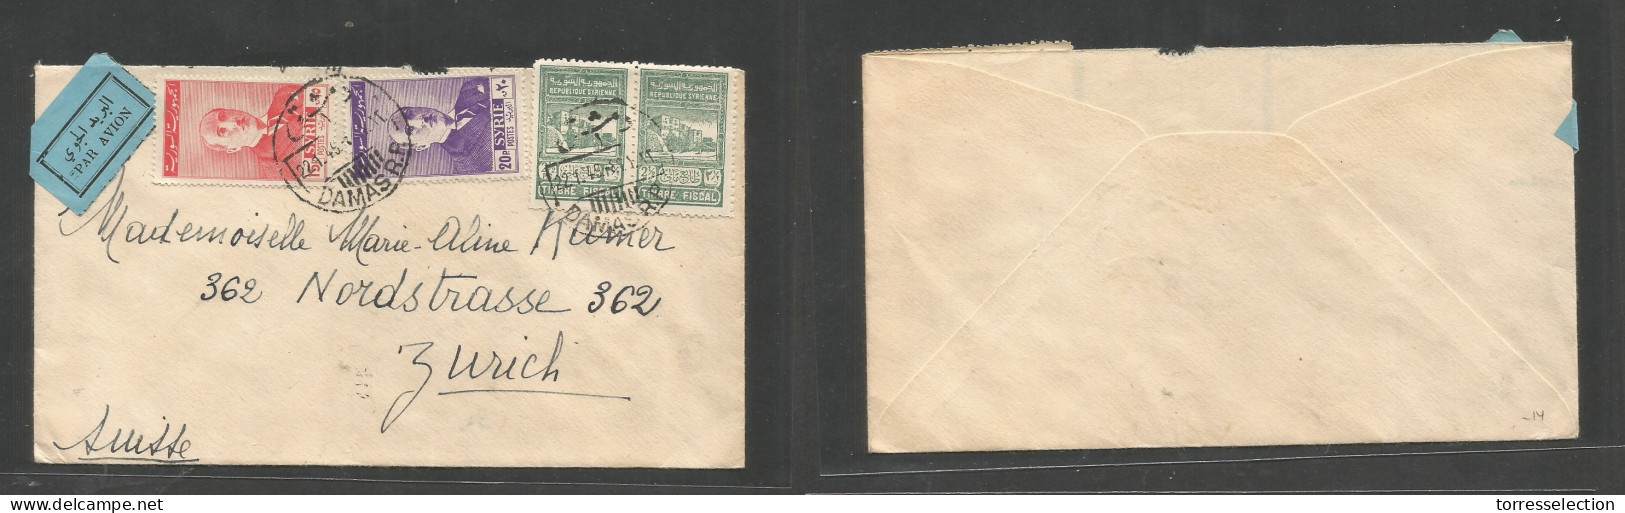 SYRIA. 1949 (22 Jan) Damas - Switzerland, Zurich. Air Multifkd Env Incl Two Fiscal Stamps, Tied Cds. VF Used. - Siria